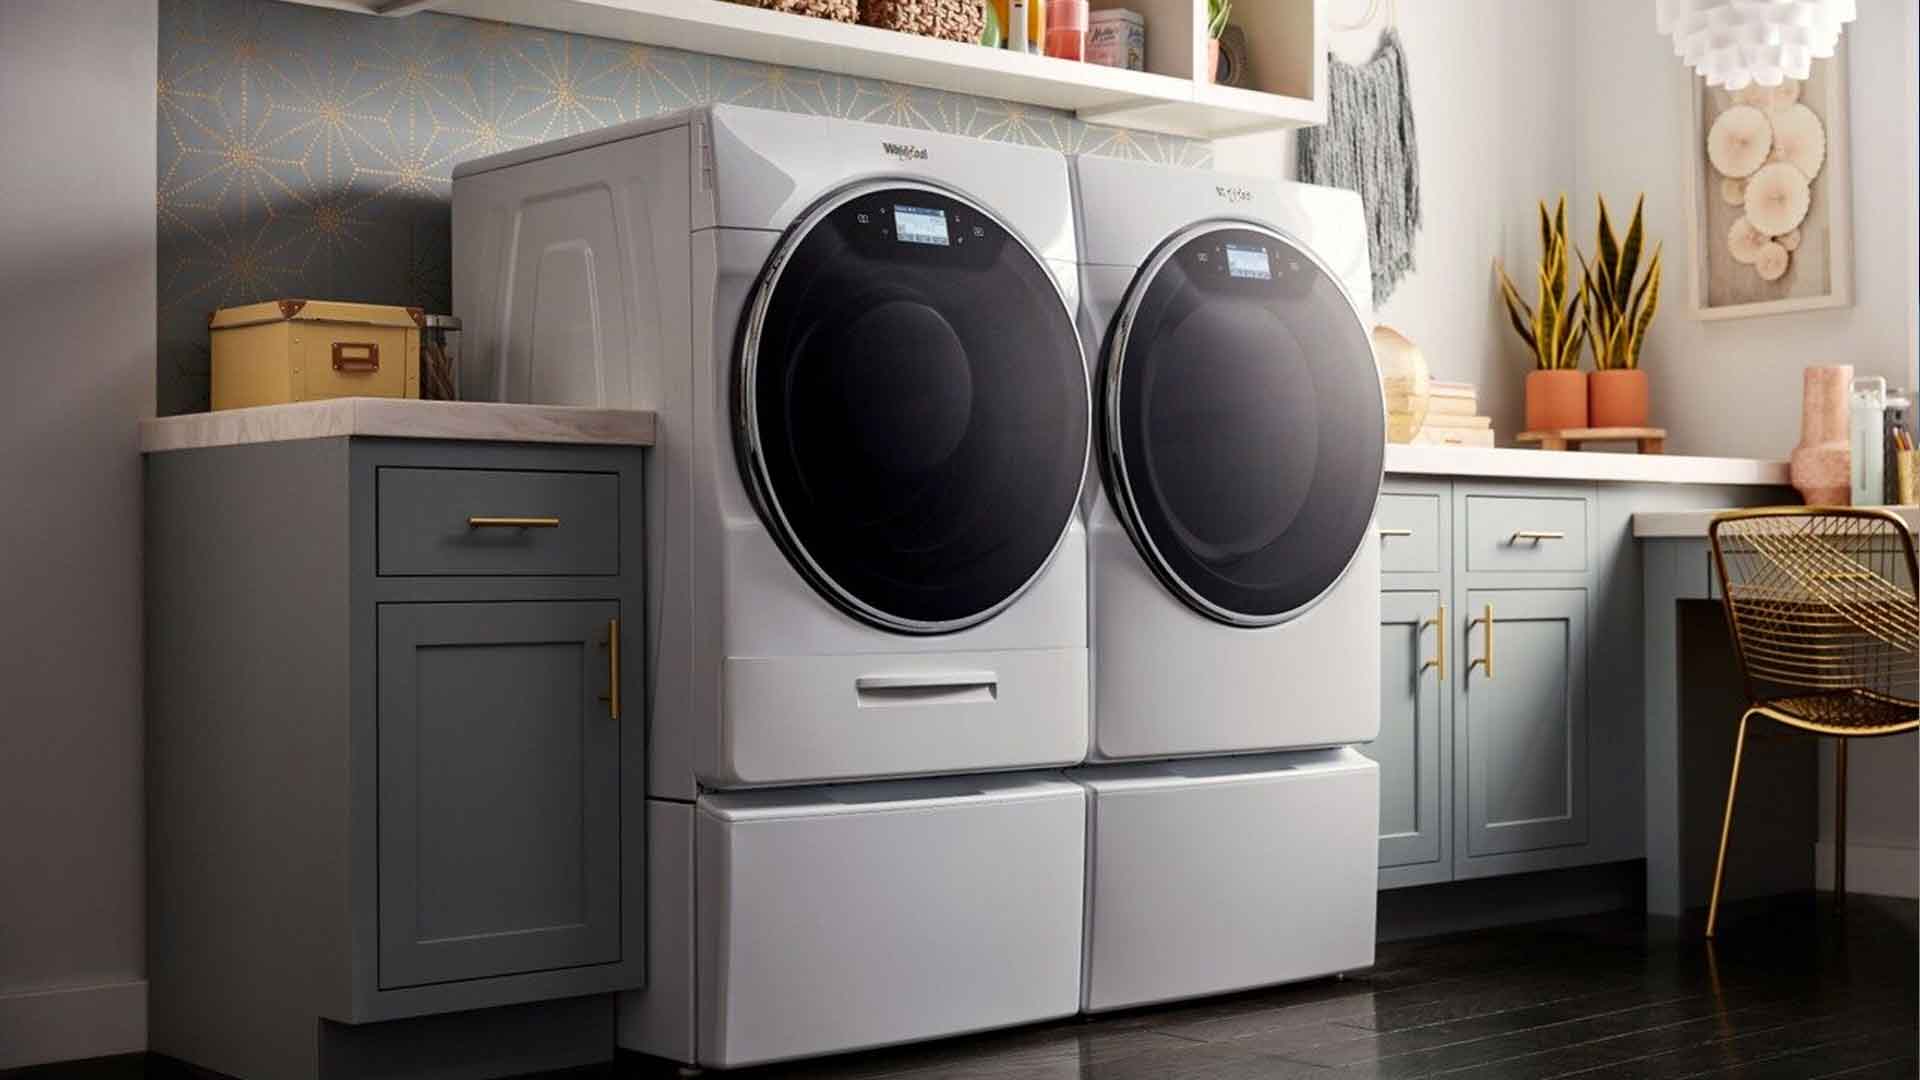 How Do I Know if My Whirlpool Washer Transmission is Bad?